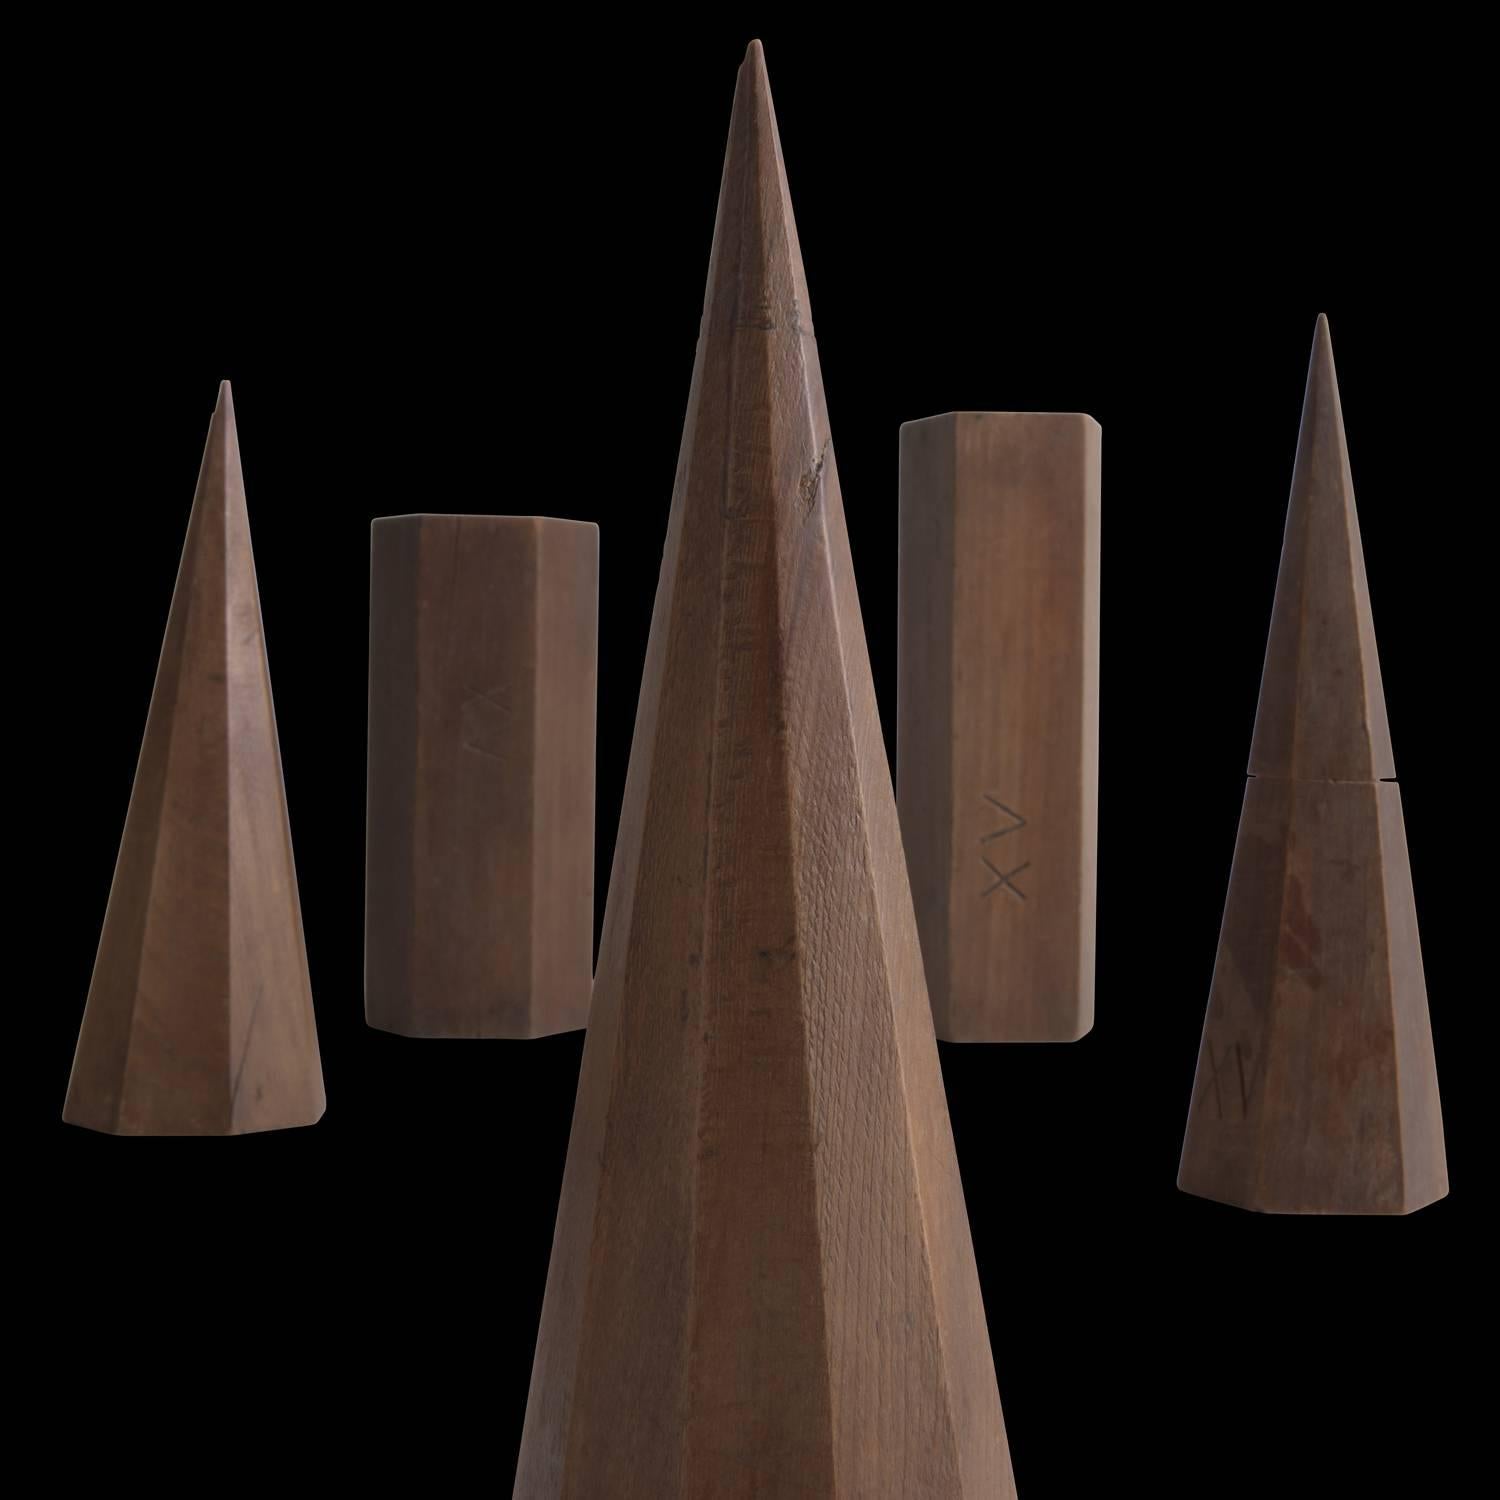 English Set of 11 Wooden Geometric Forms